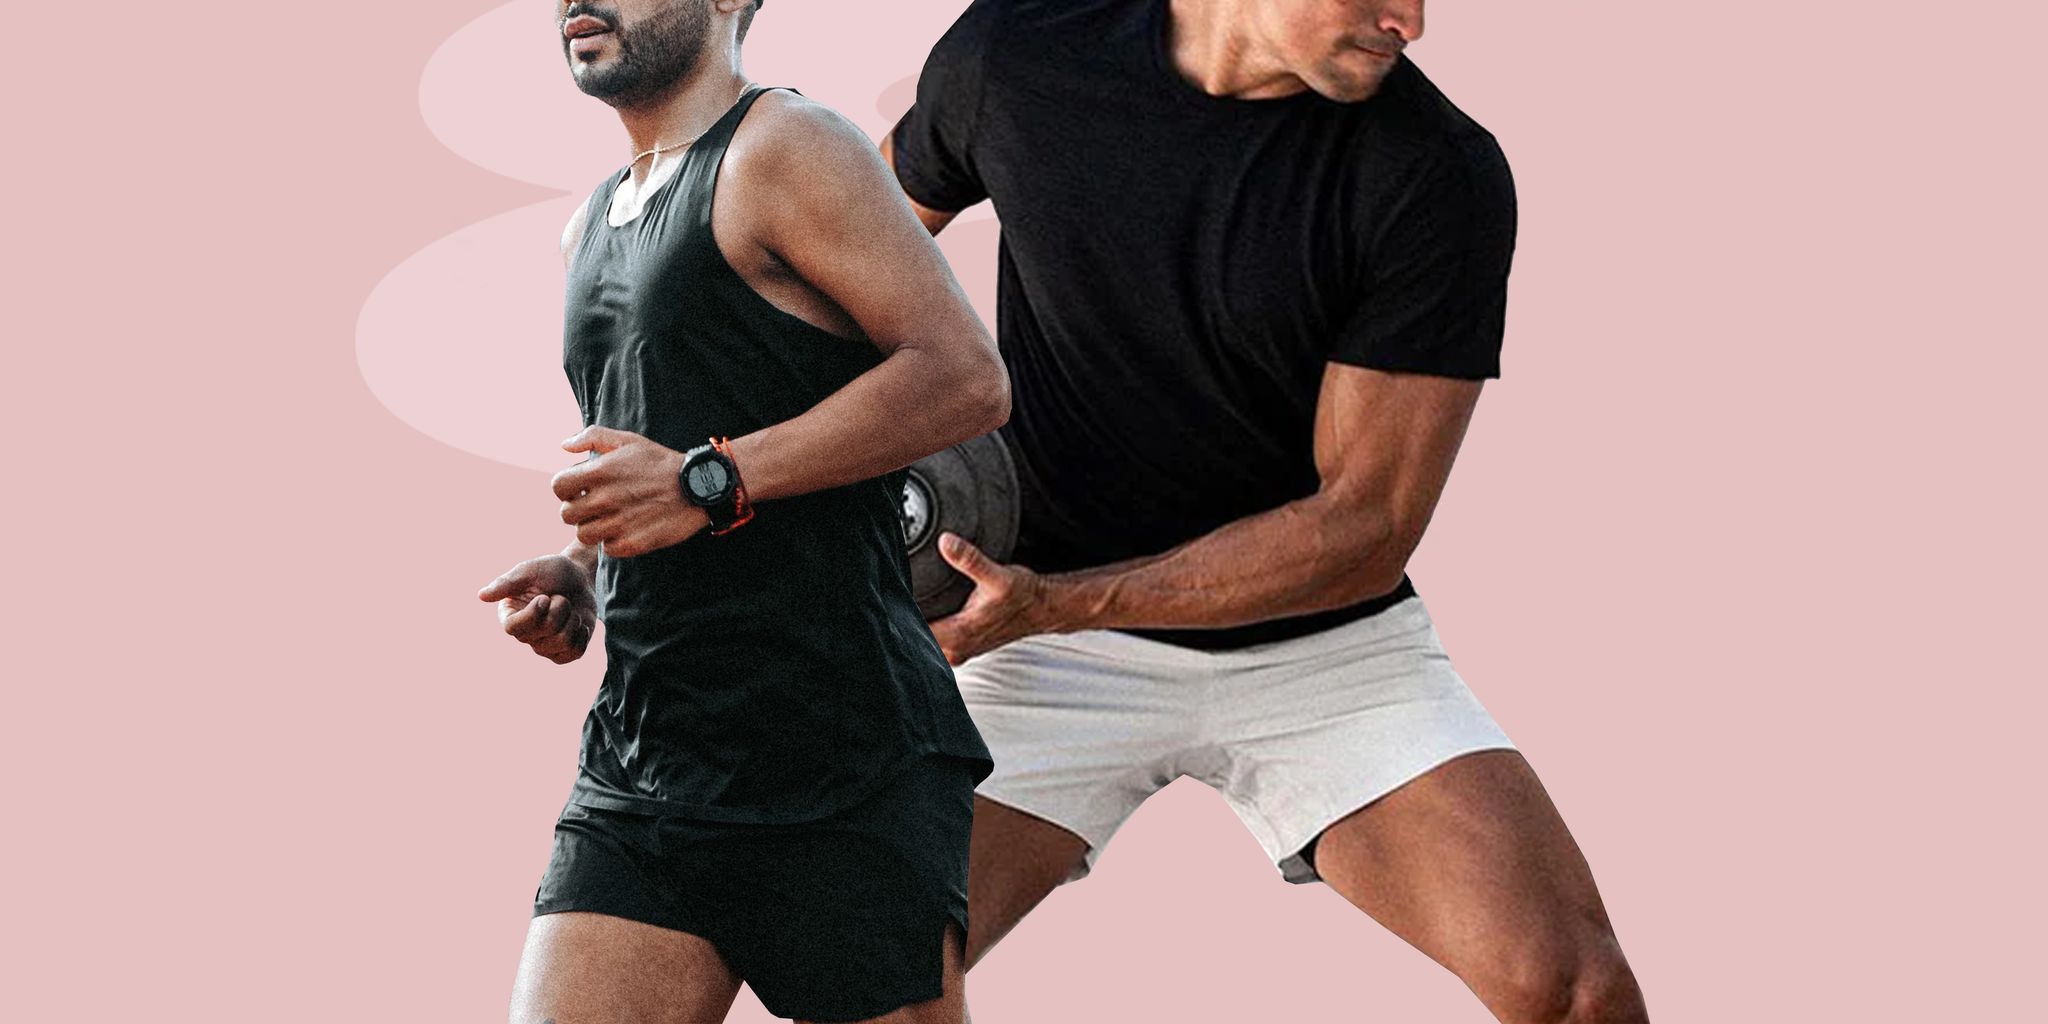 Uniqlo Canada - New year, new resolutions! Work on your fitness